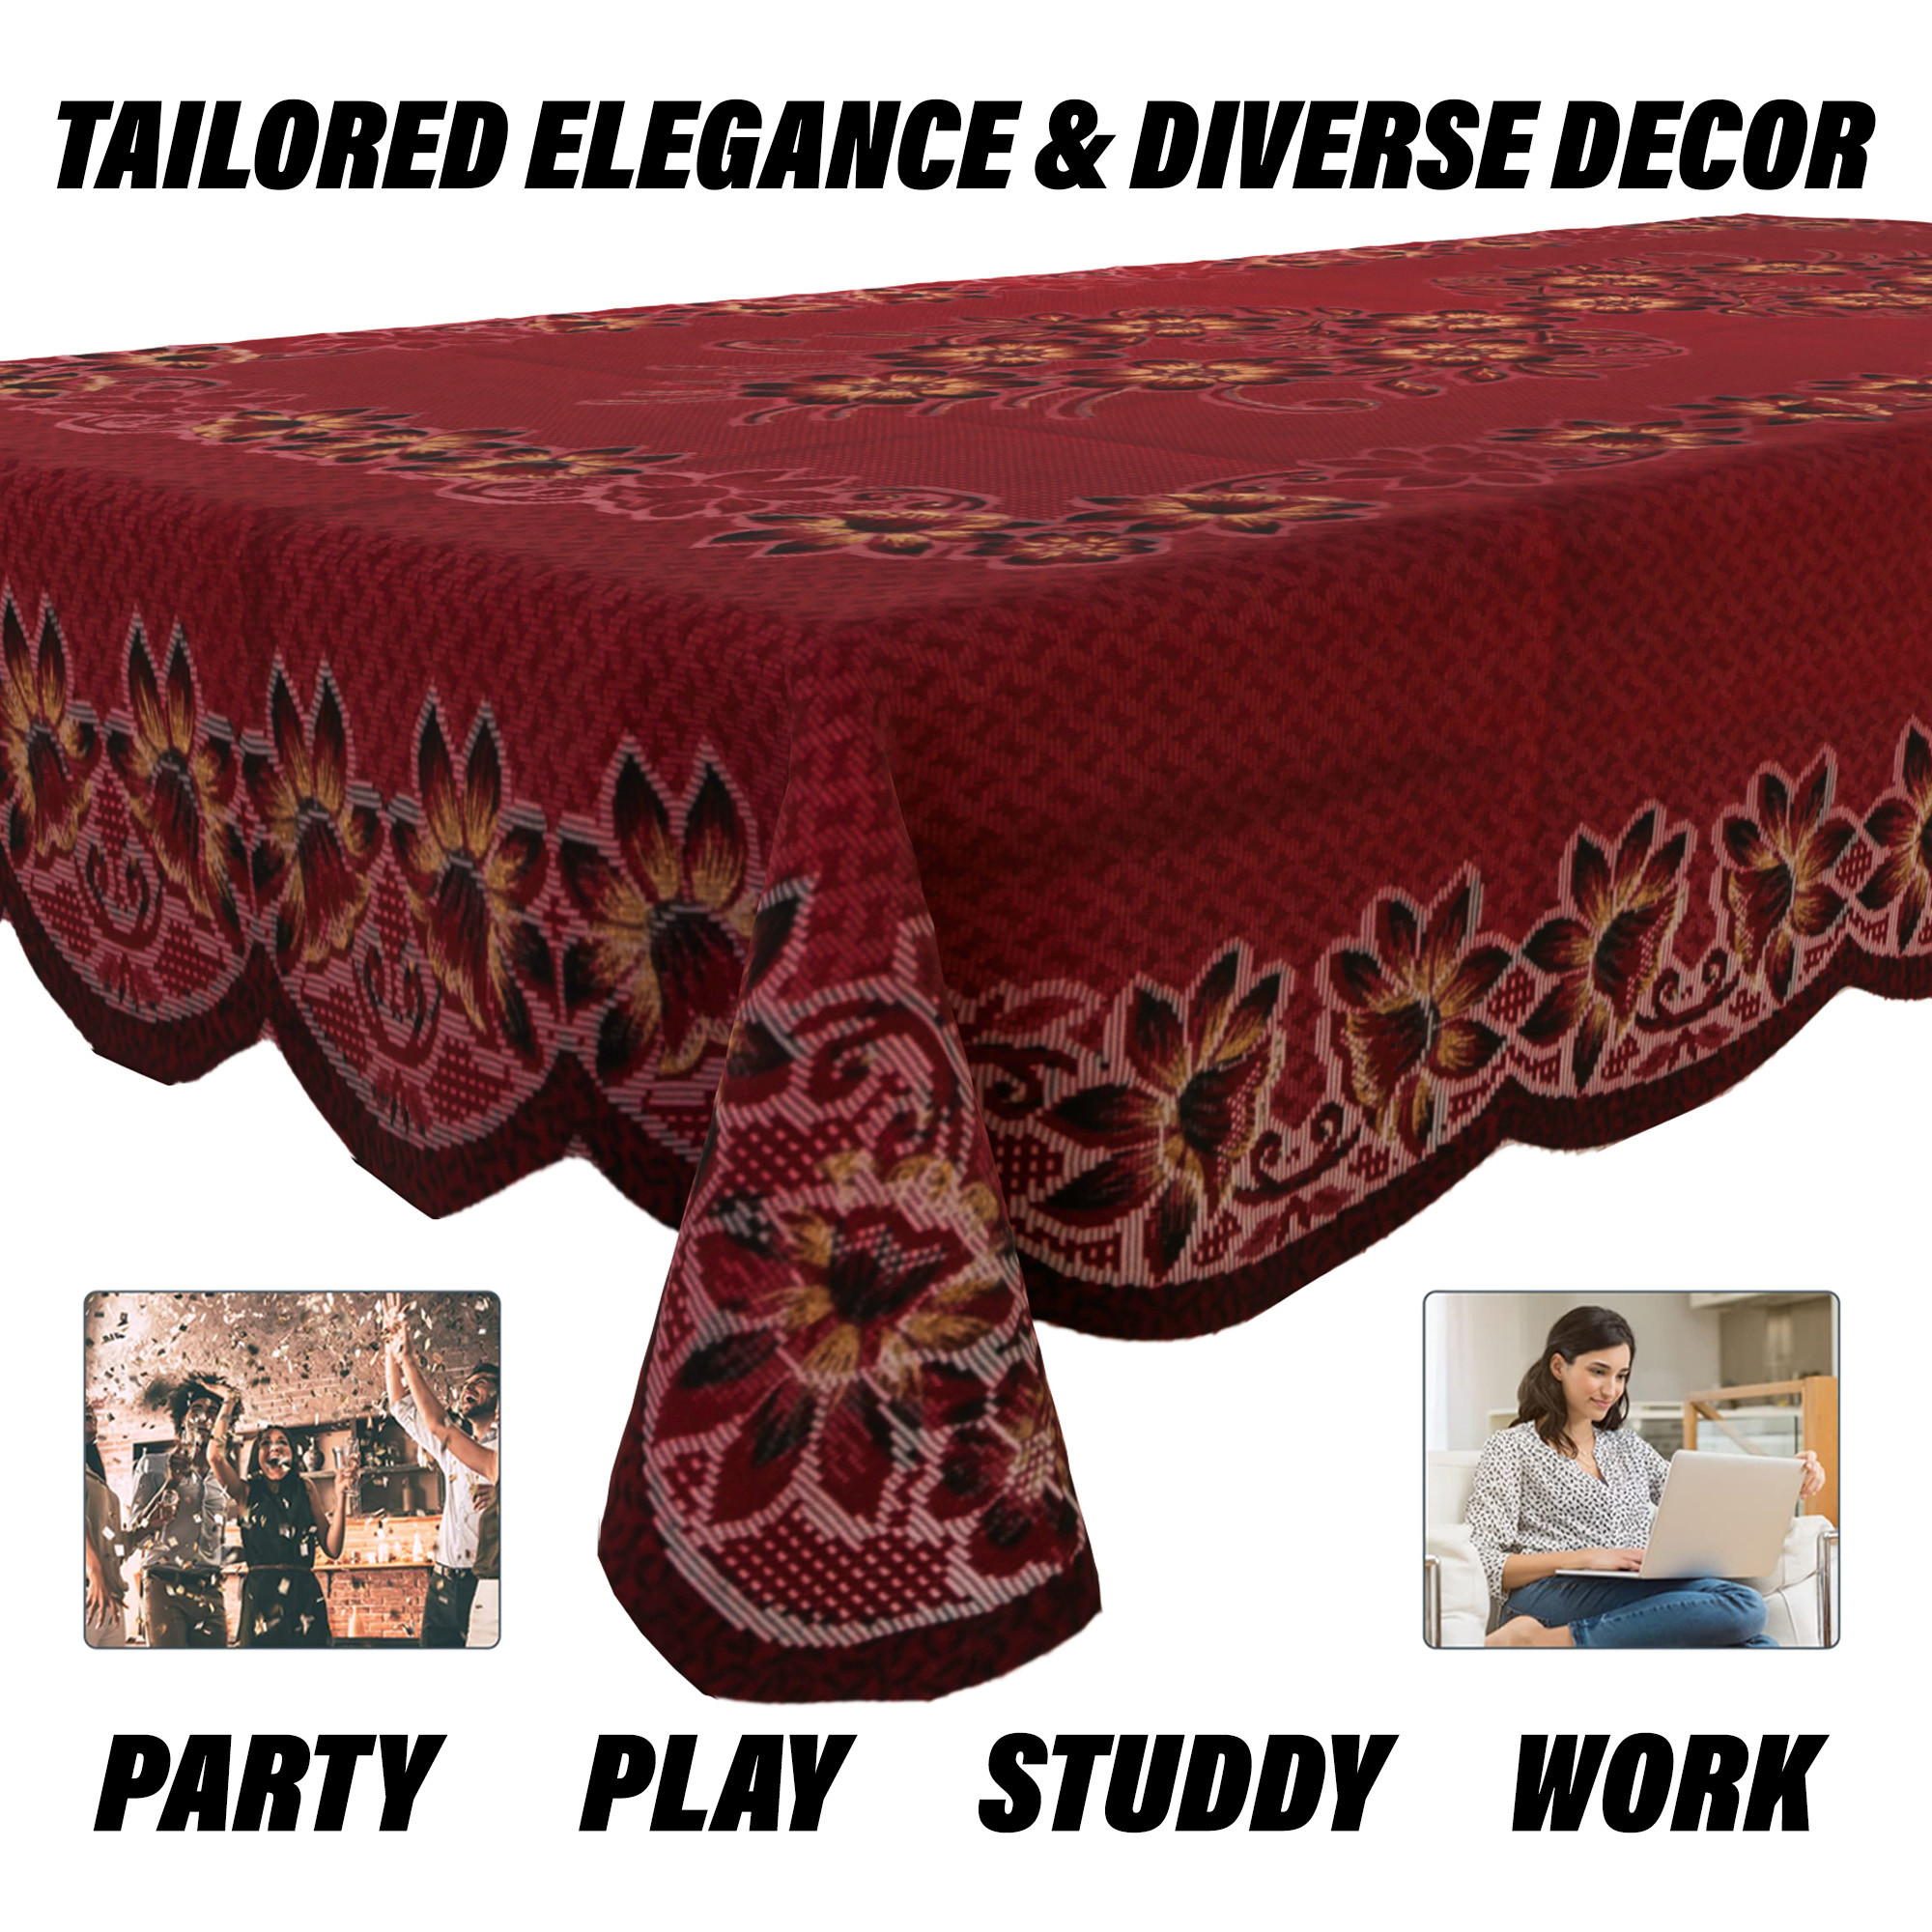 Kuber Industries Center Table Cover | 4-Seater Table Cover | Net Tabletop Cover | Kitchen Table Cloth | Table Protector Cover | Flower Painting-Design | 40x60 Inch | CTC | Maroon